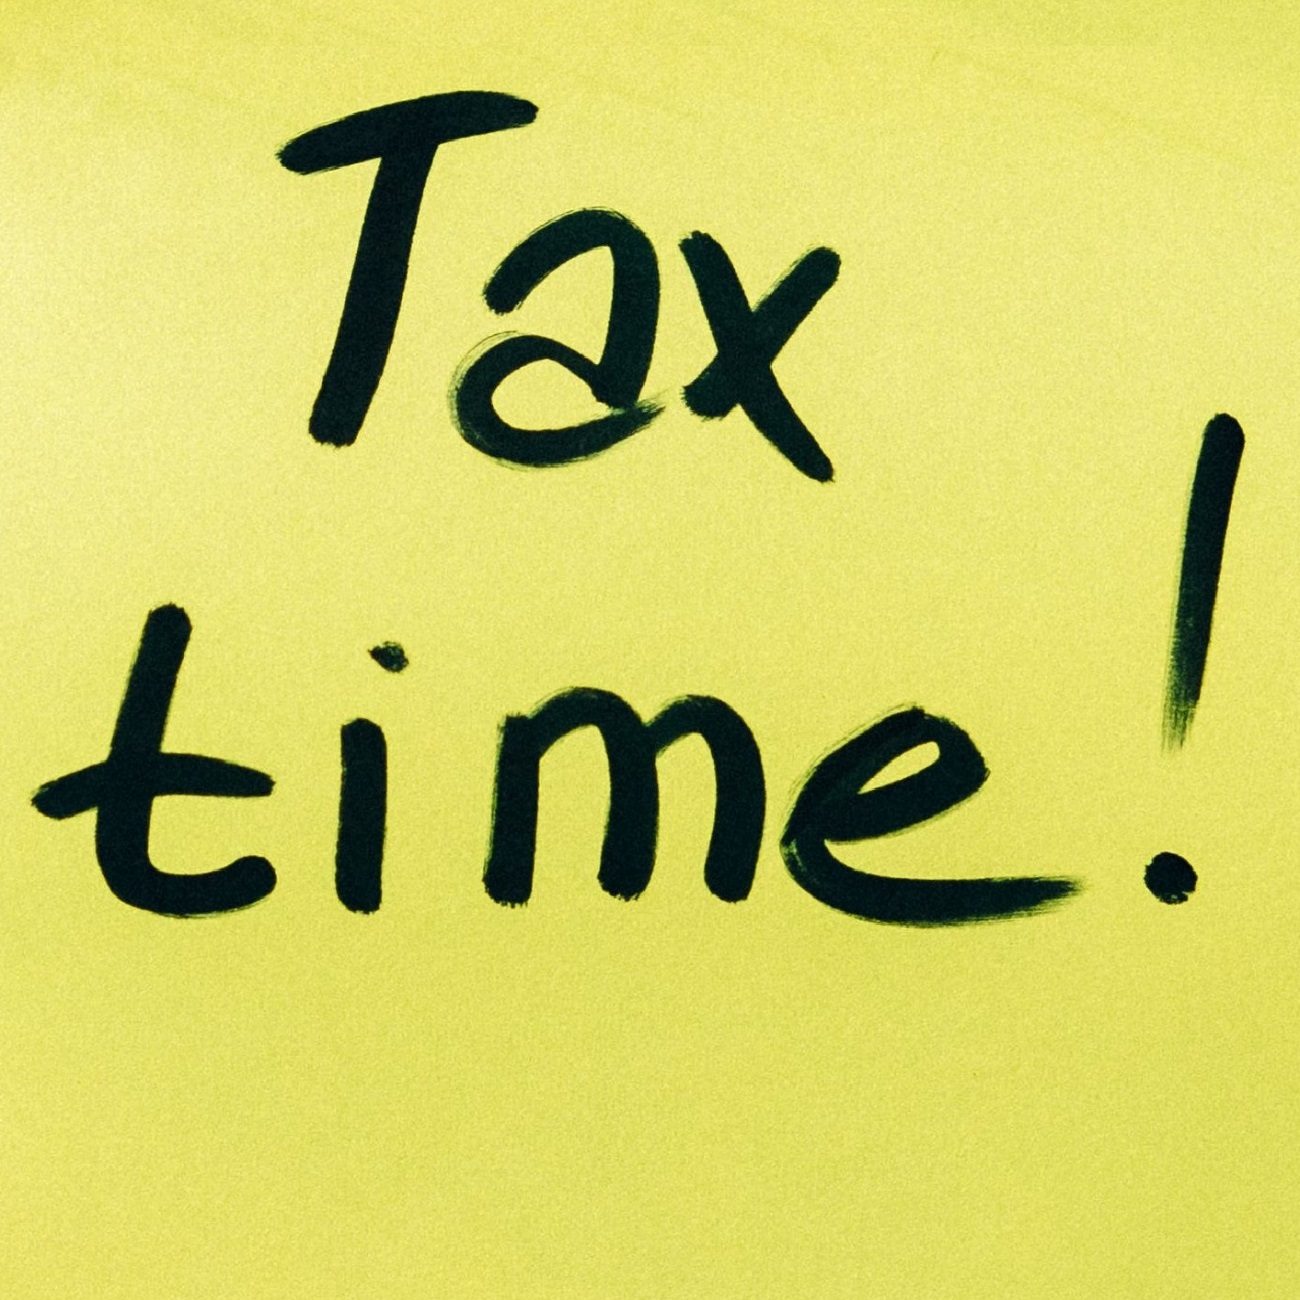 Accountant to resolve tax problems